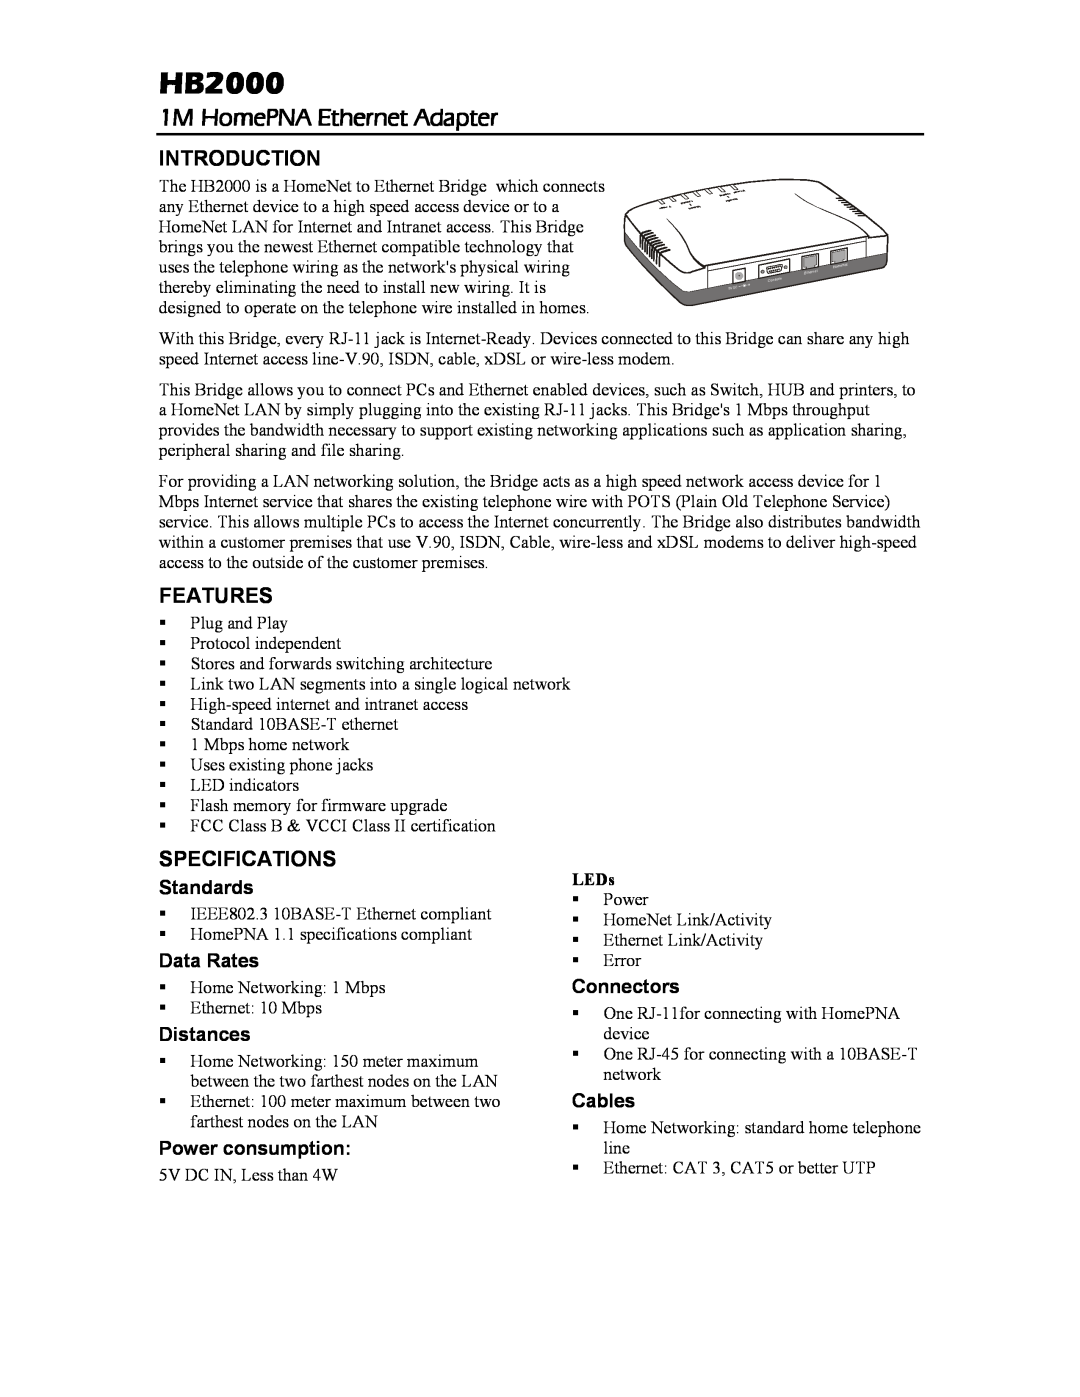 Abocom HB2000 specifications 1M HomePNA Ethernet Adapter, Introduction, Features, Specifications, Standards, Data Rates 